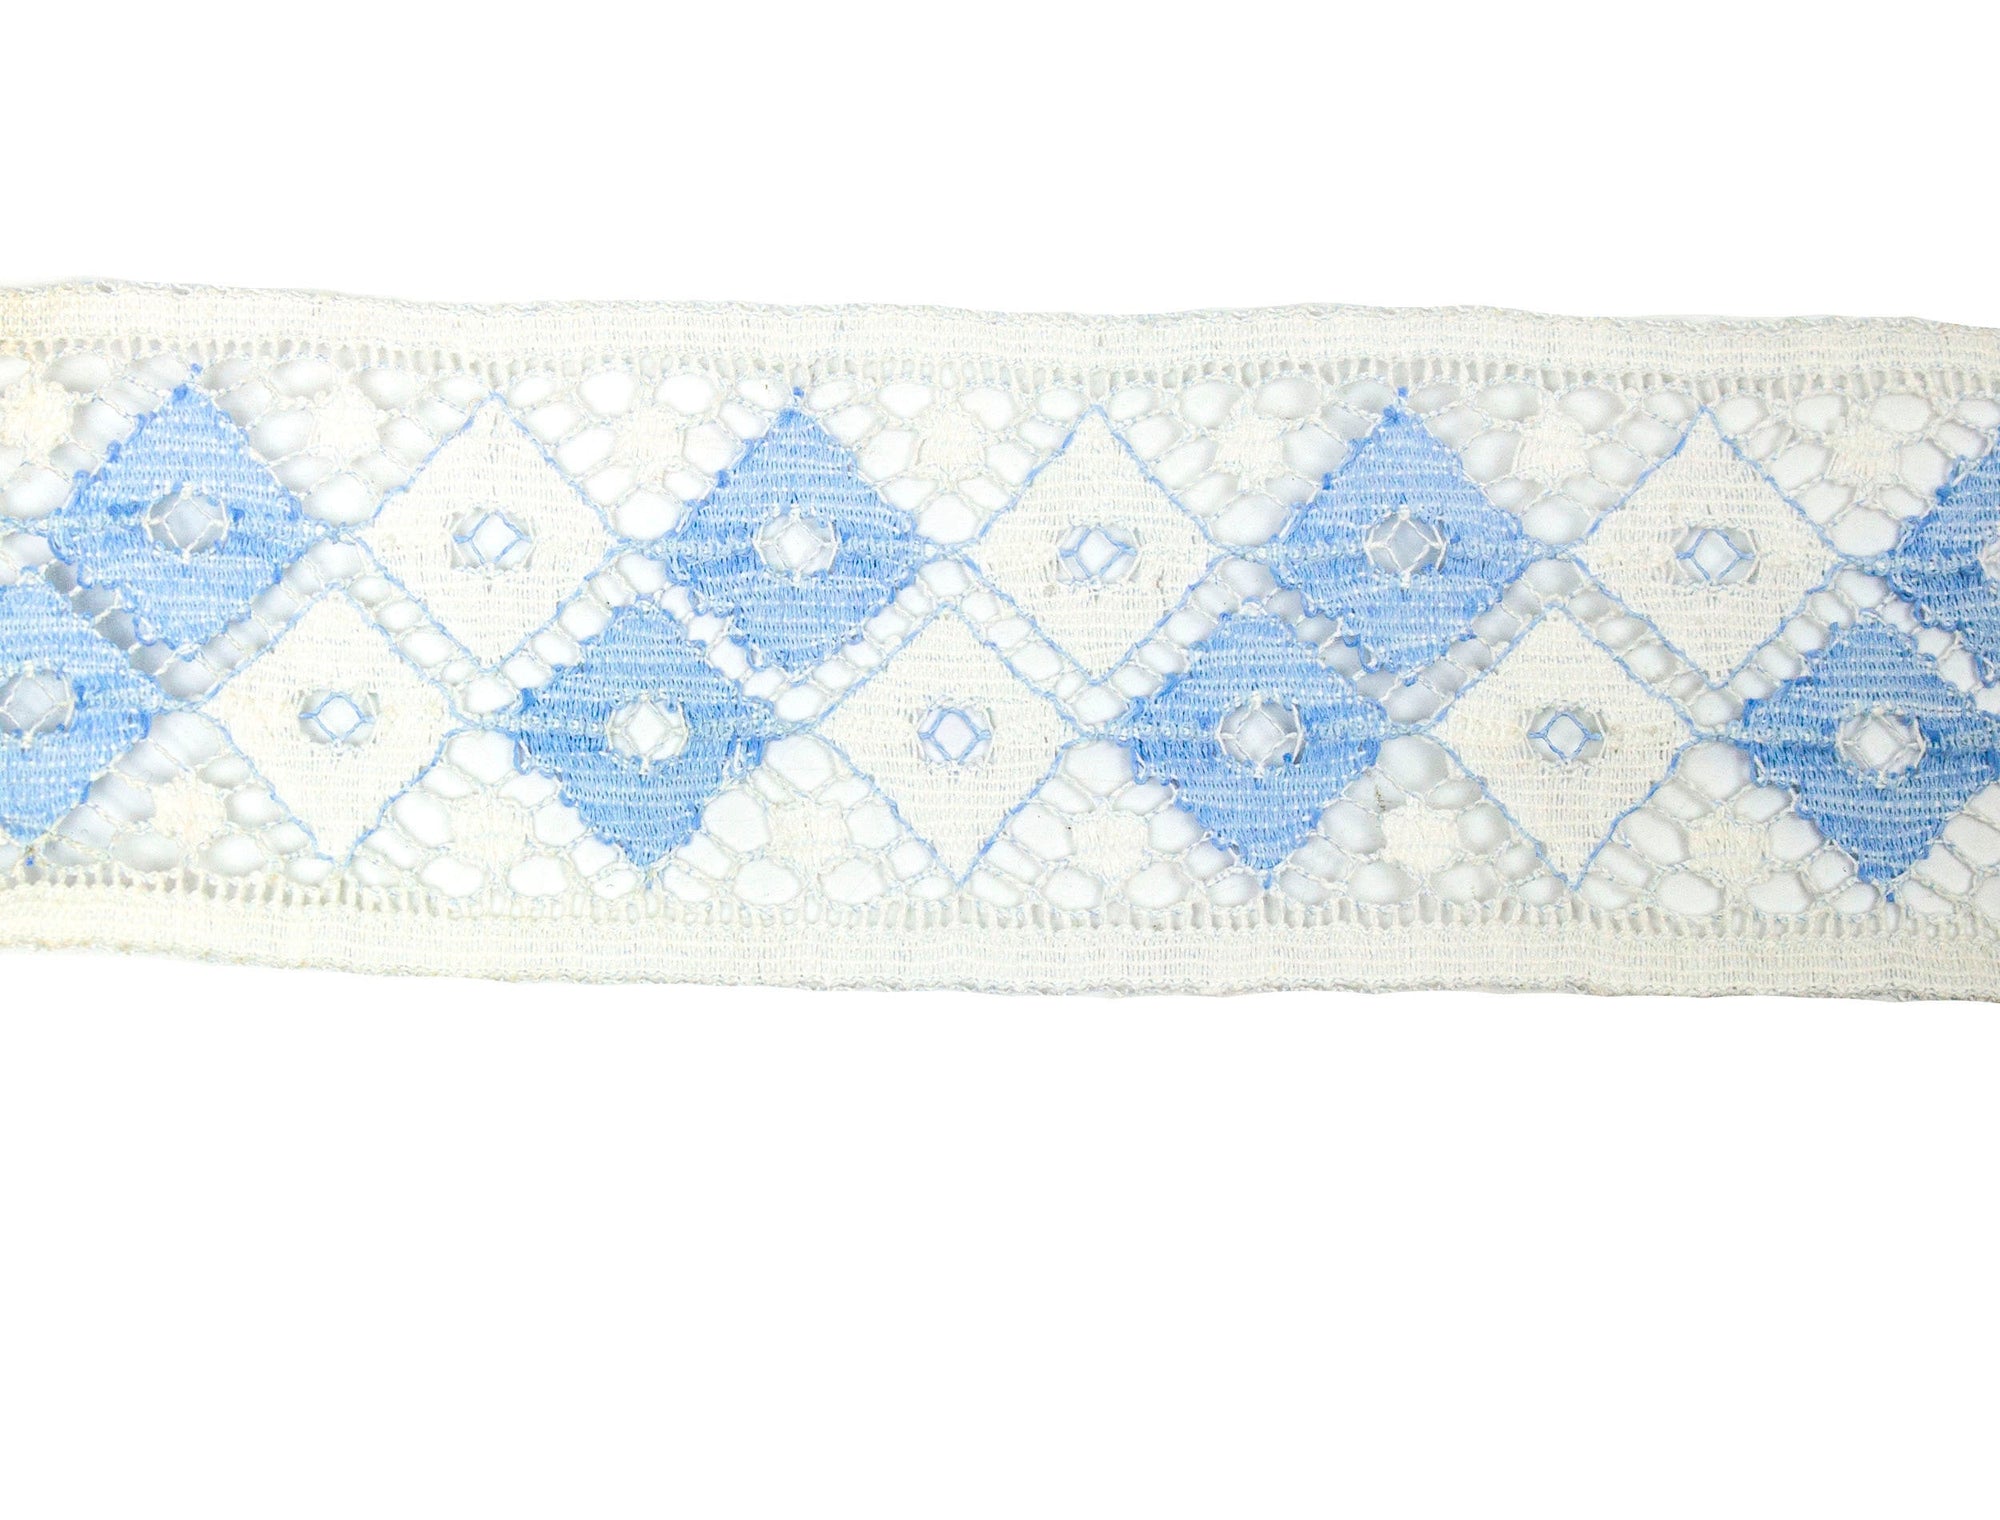 Vintage Lace Trim Light Blue and White 2 1/4" Wide - One Piece 2 1/2 Yards Long - Humboldt Haberdashery